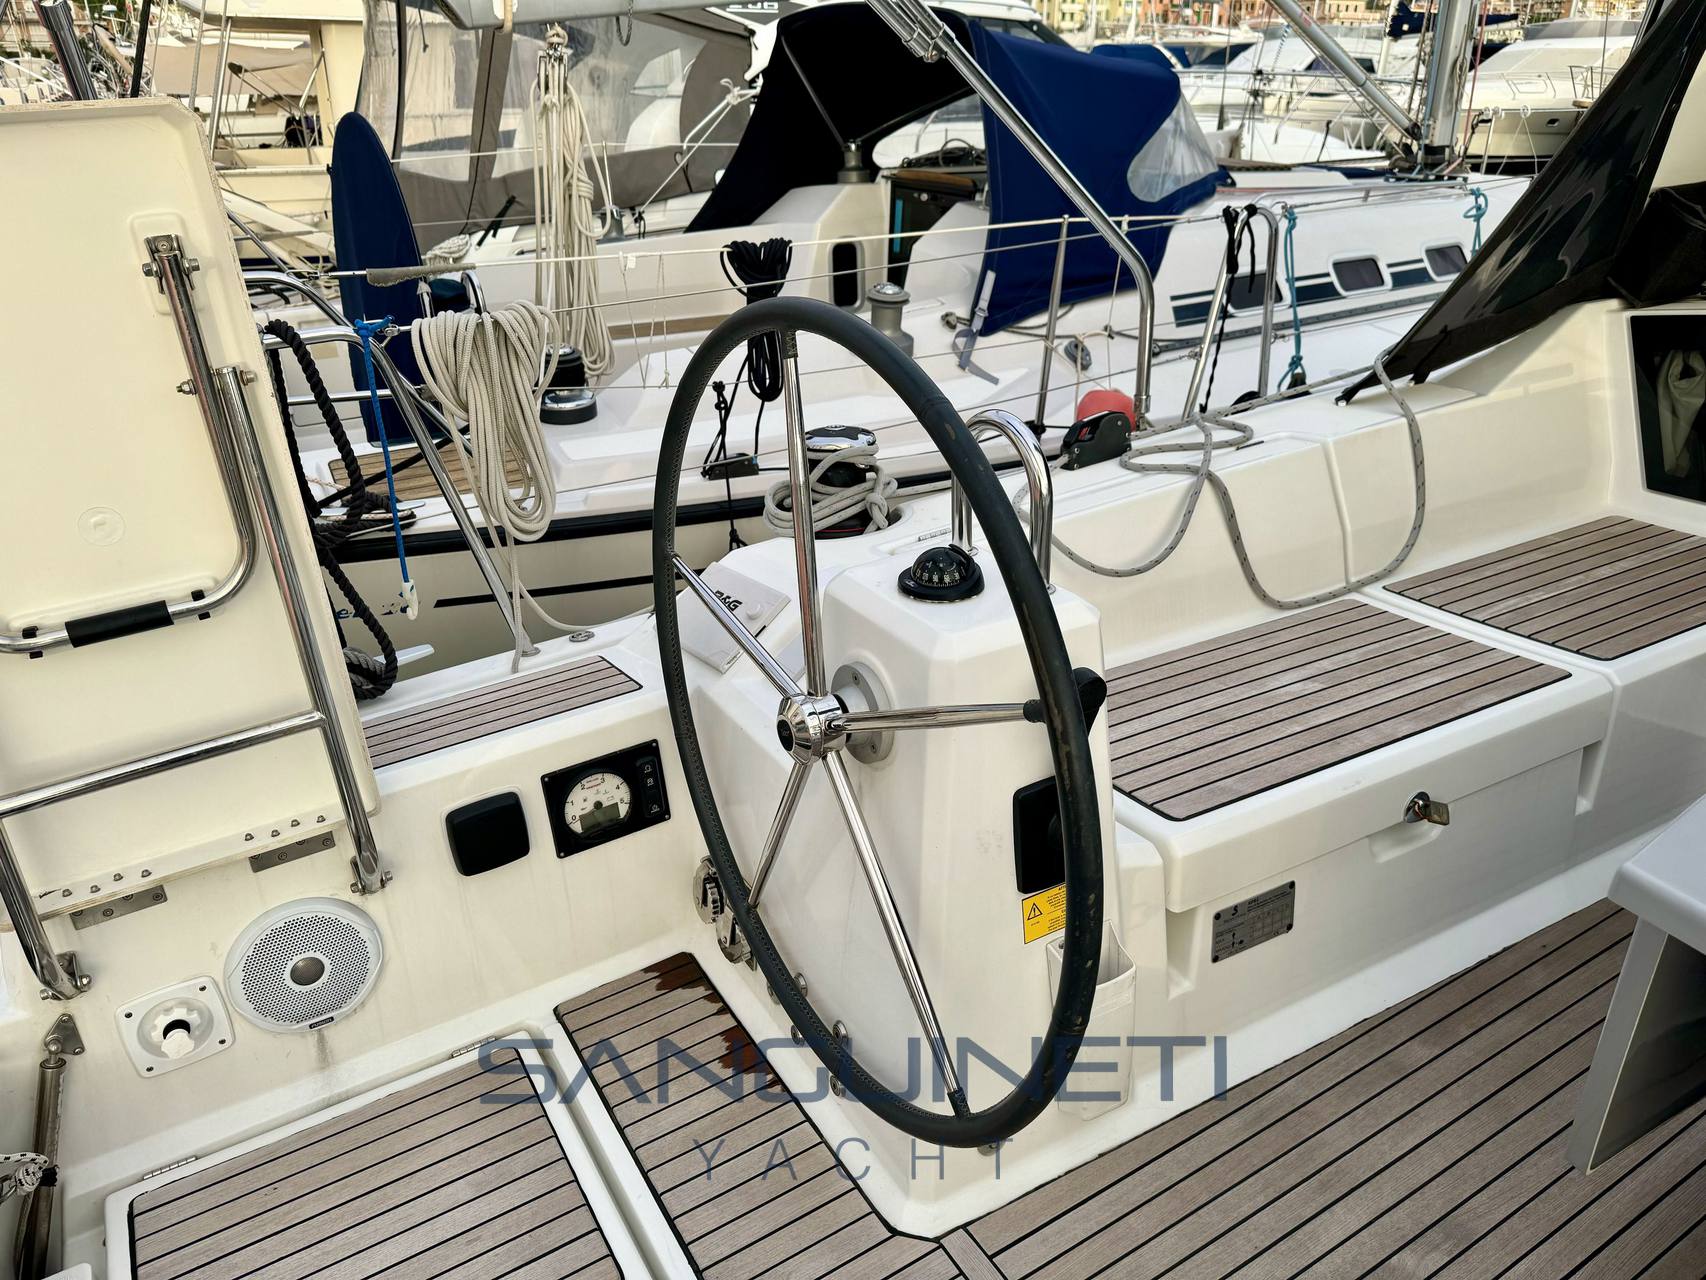 Beneteau Oceanis 41.1 Sailing boat used for sale